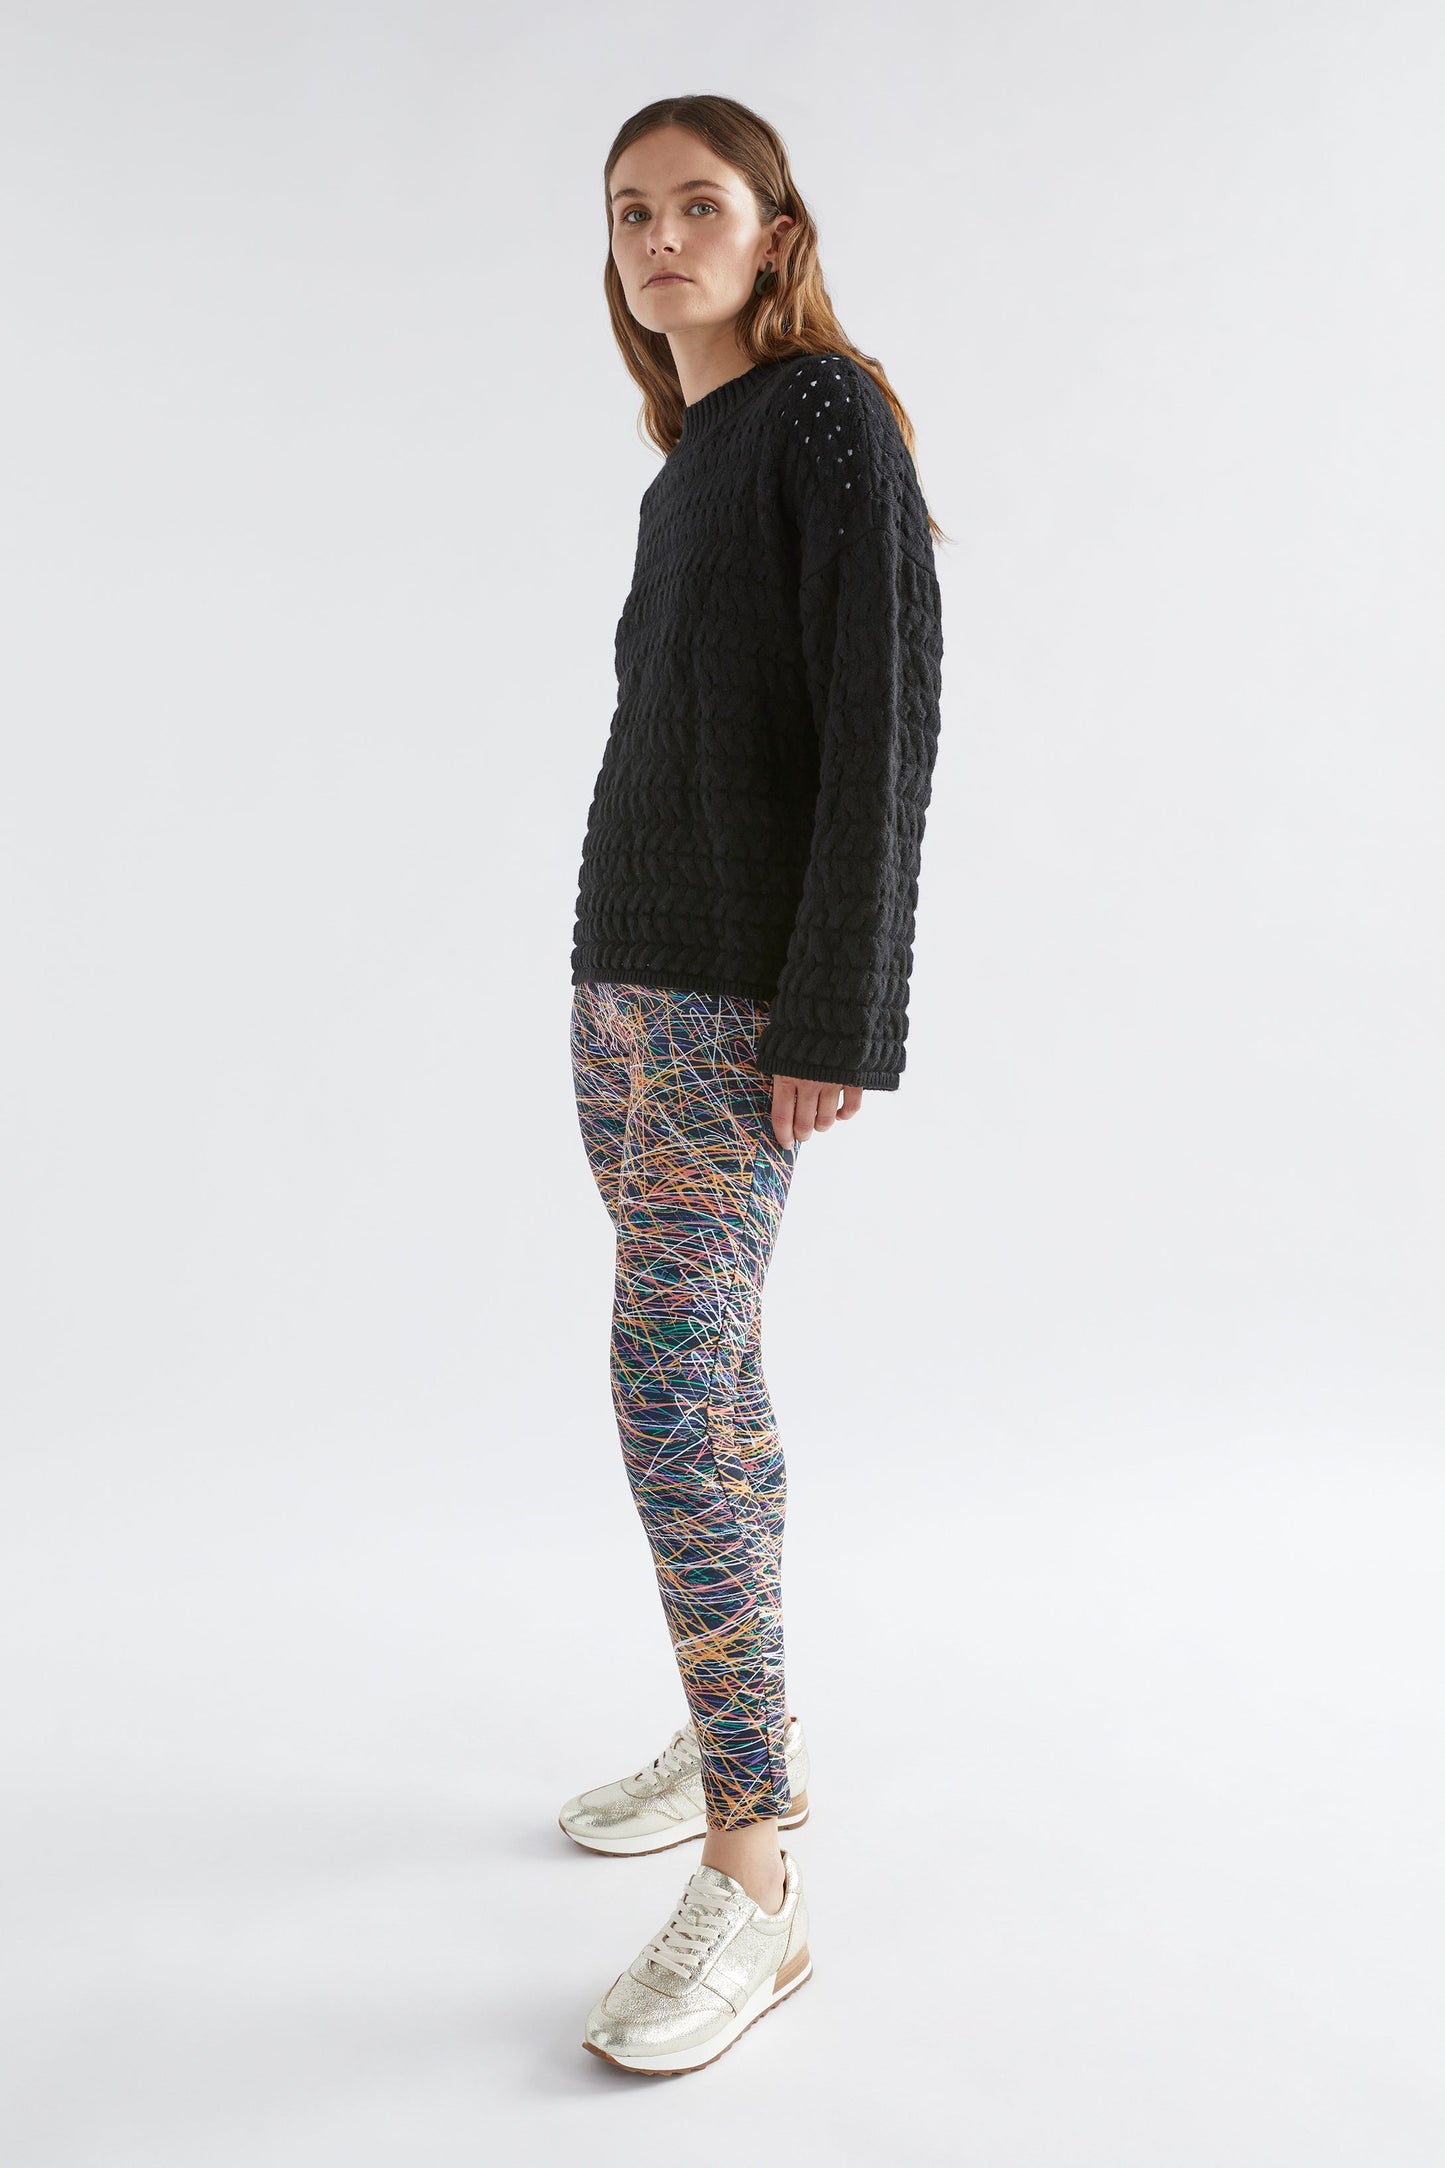 Ohut Recycled Fabric Stretch Print Legging Pant Model Angled front | MAILA PRINT